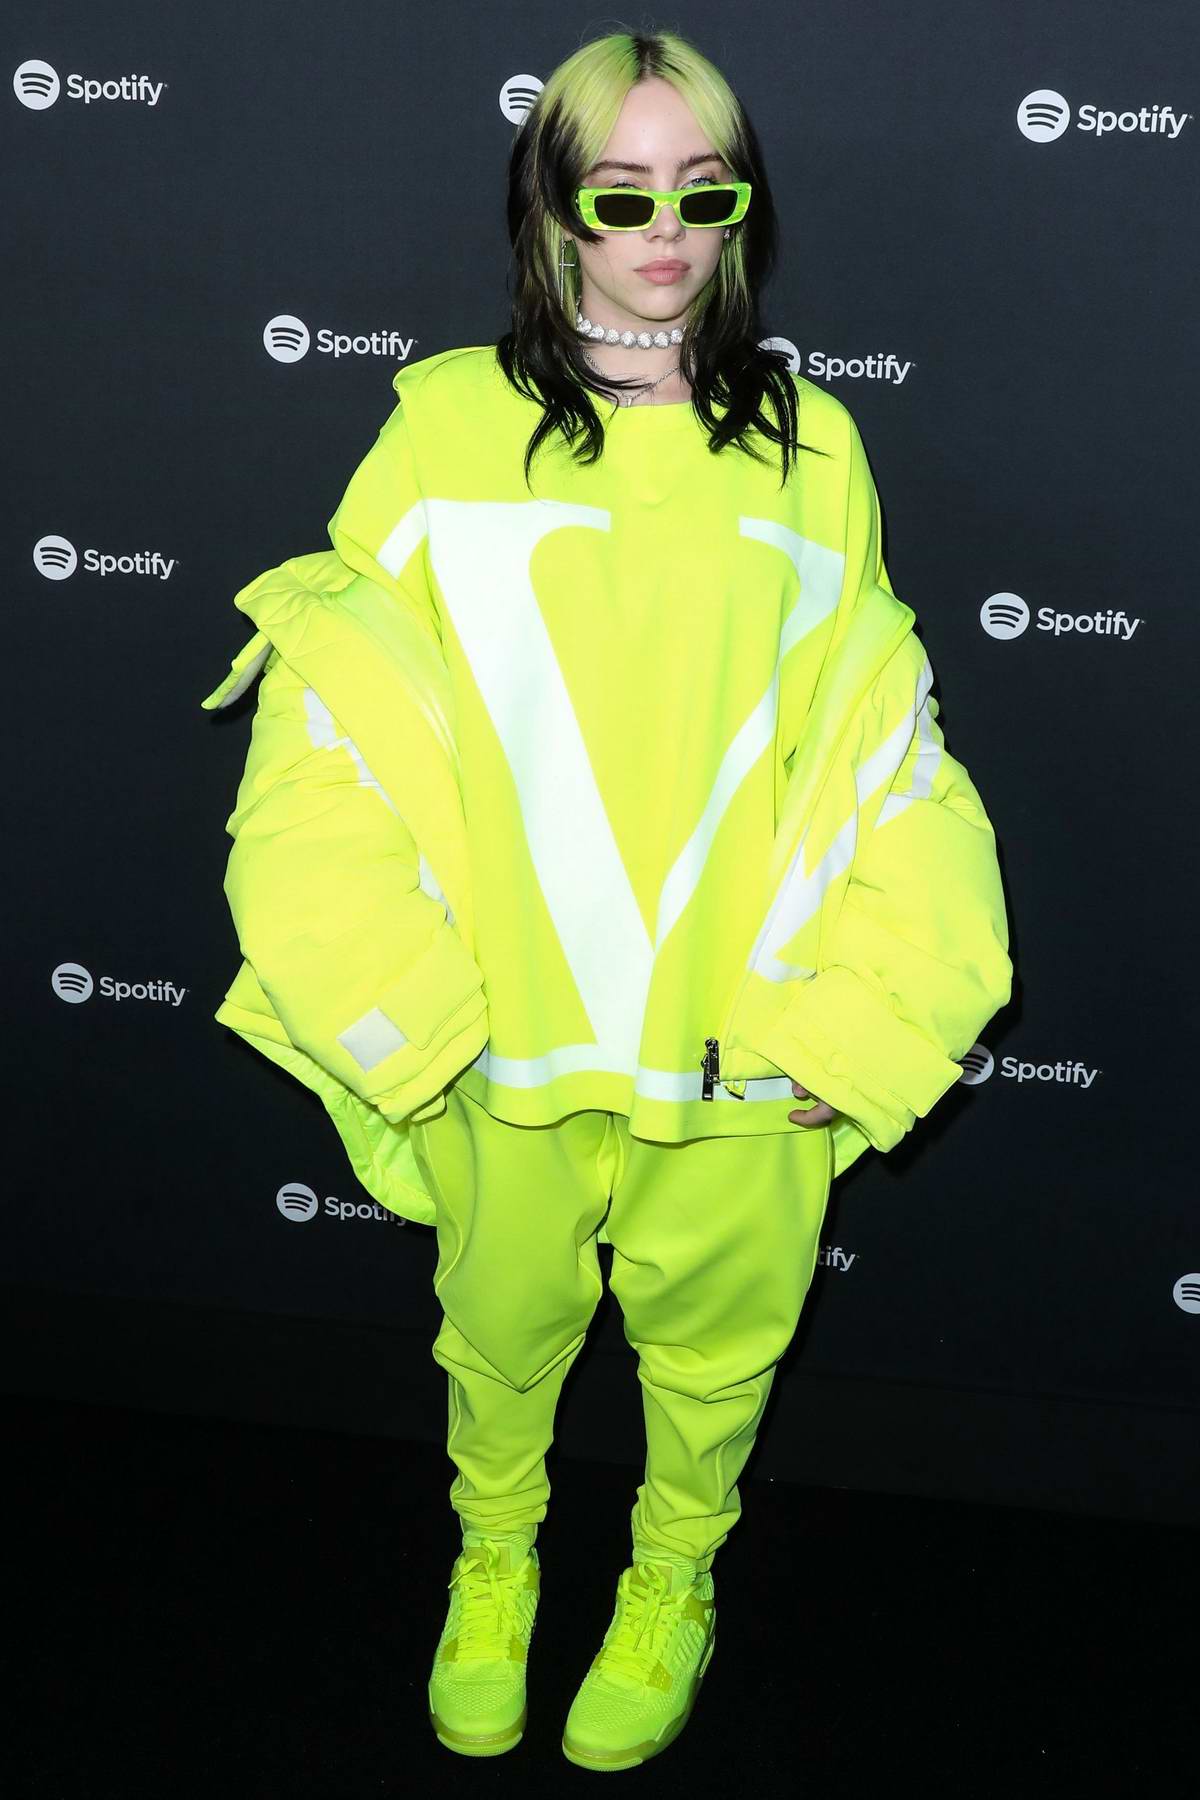 billie eilish attends the spotify 'best new artist' party 2020 in los ...